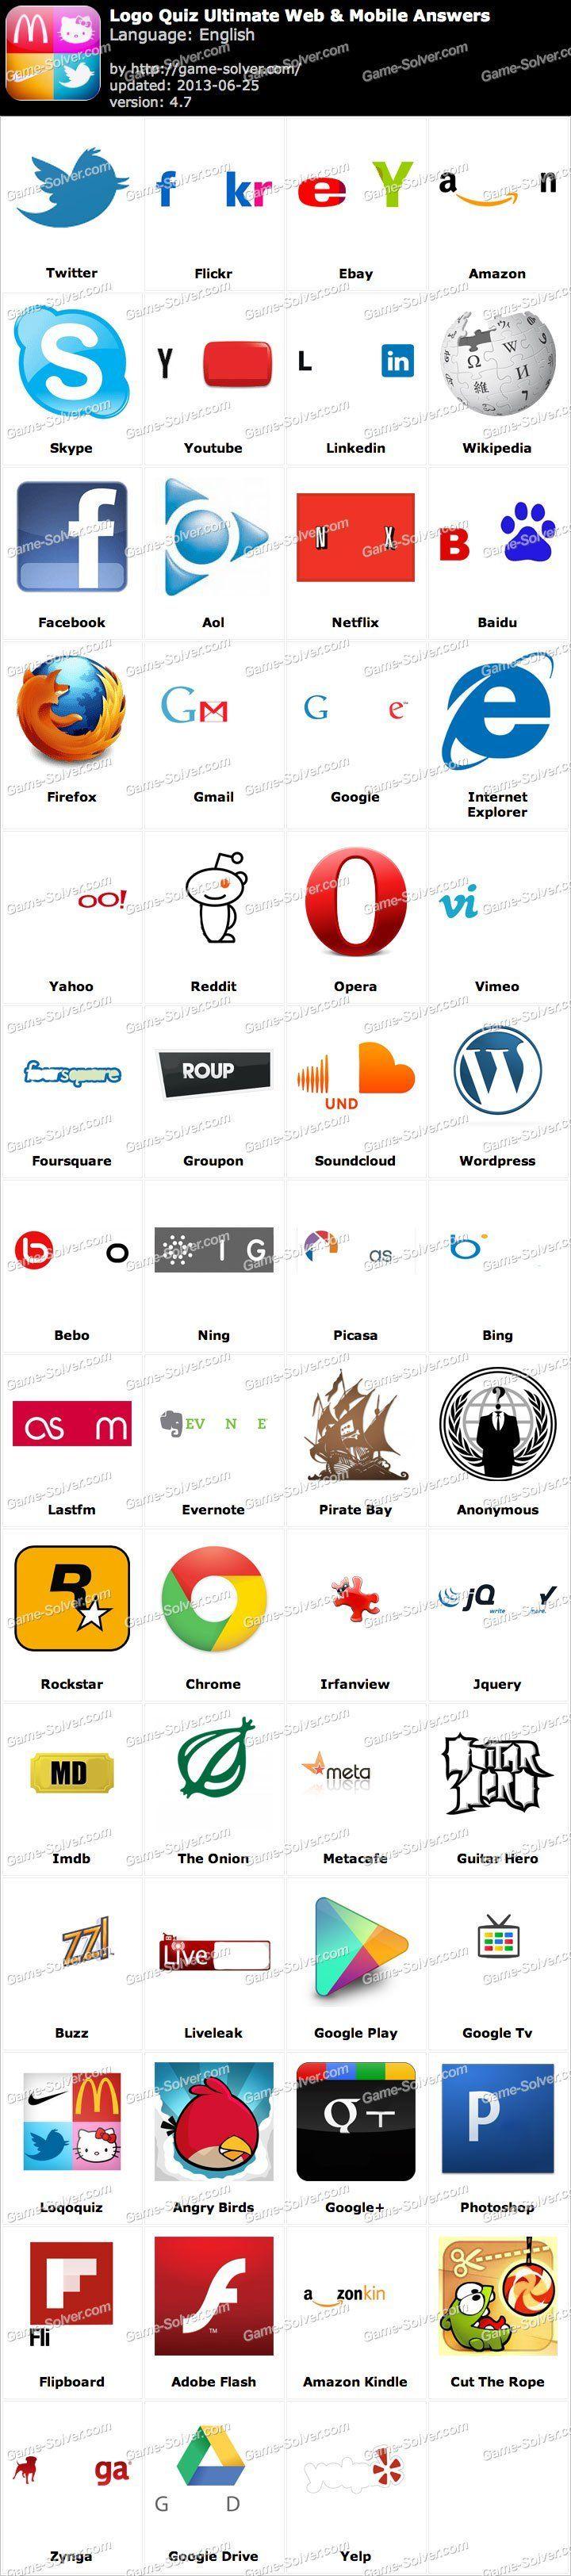 3 Blue People of Web and Tech Logo - Web And Tech Logos 3 Blue People